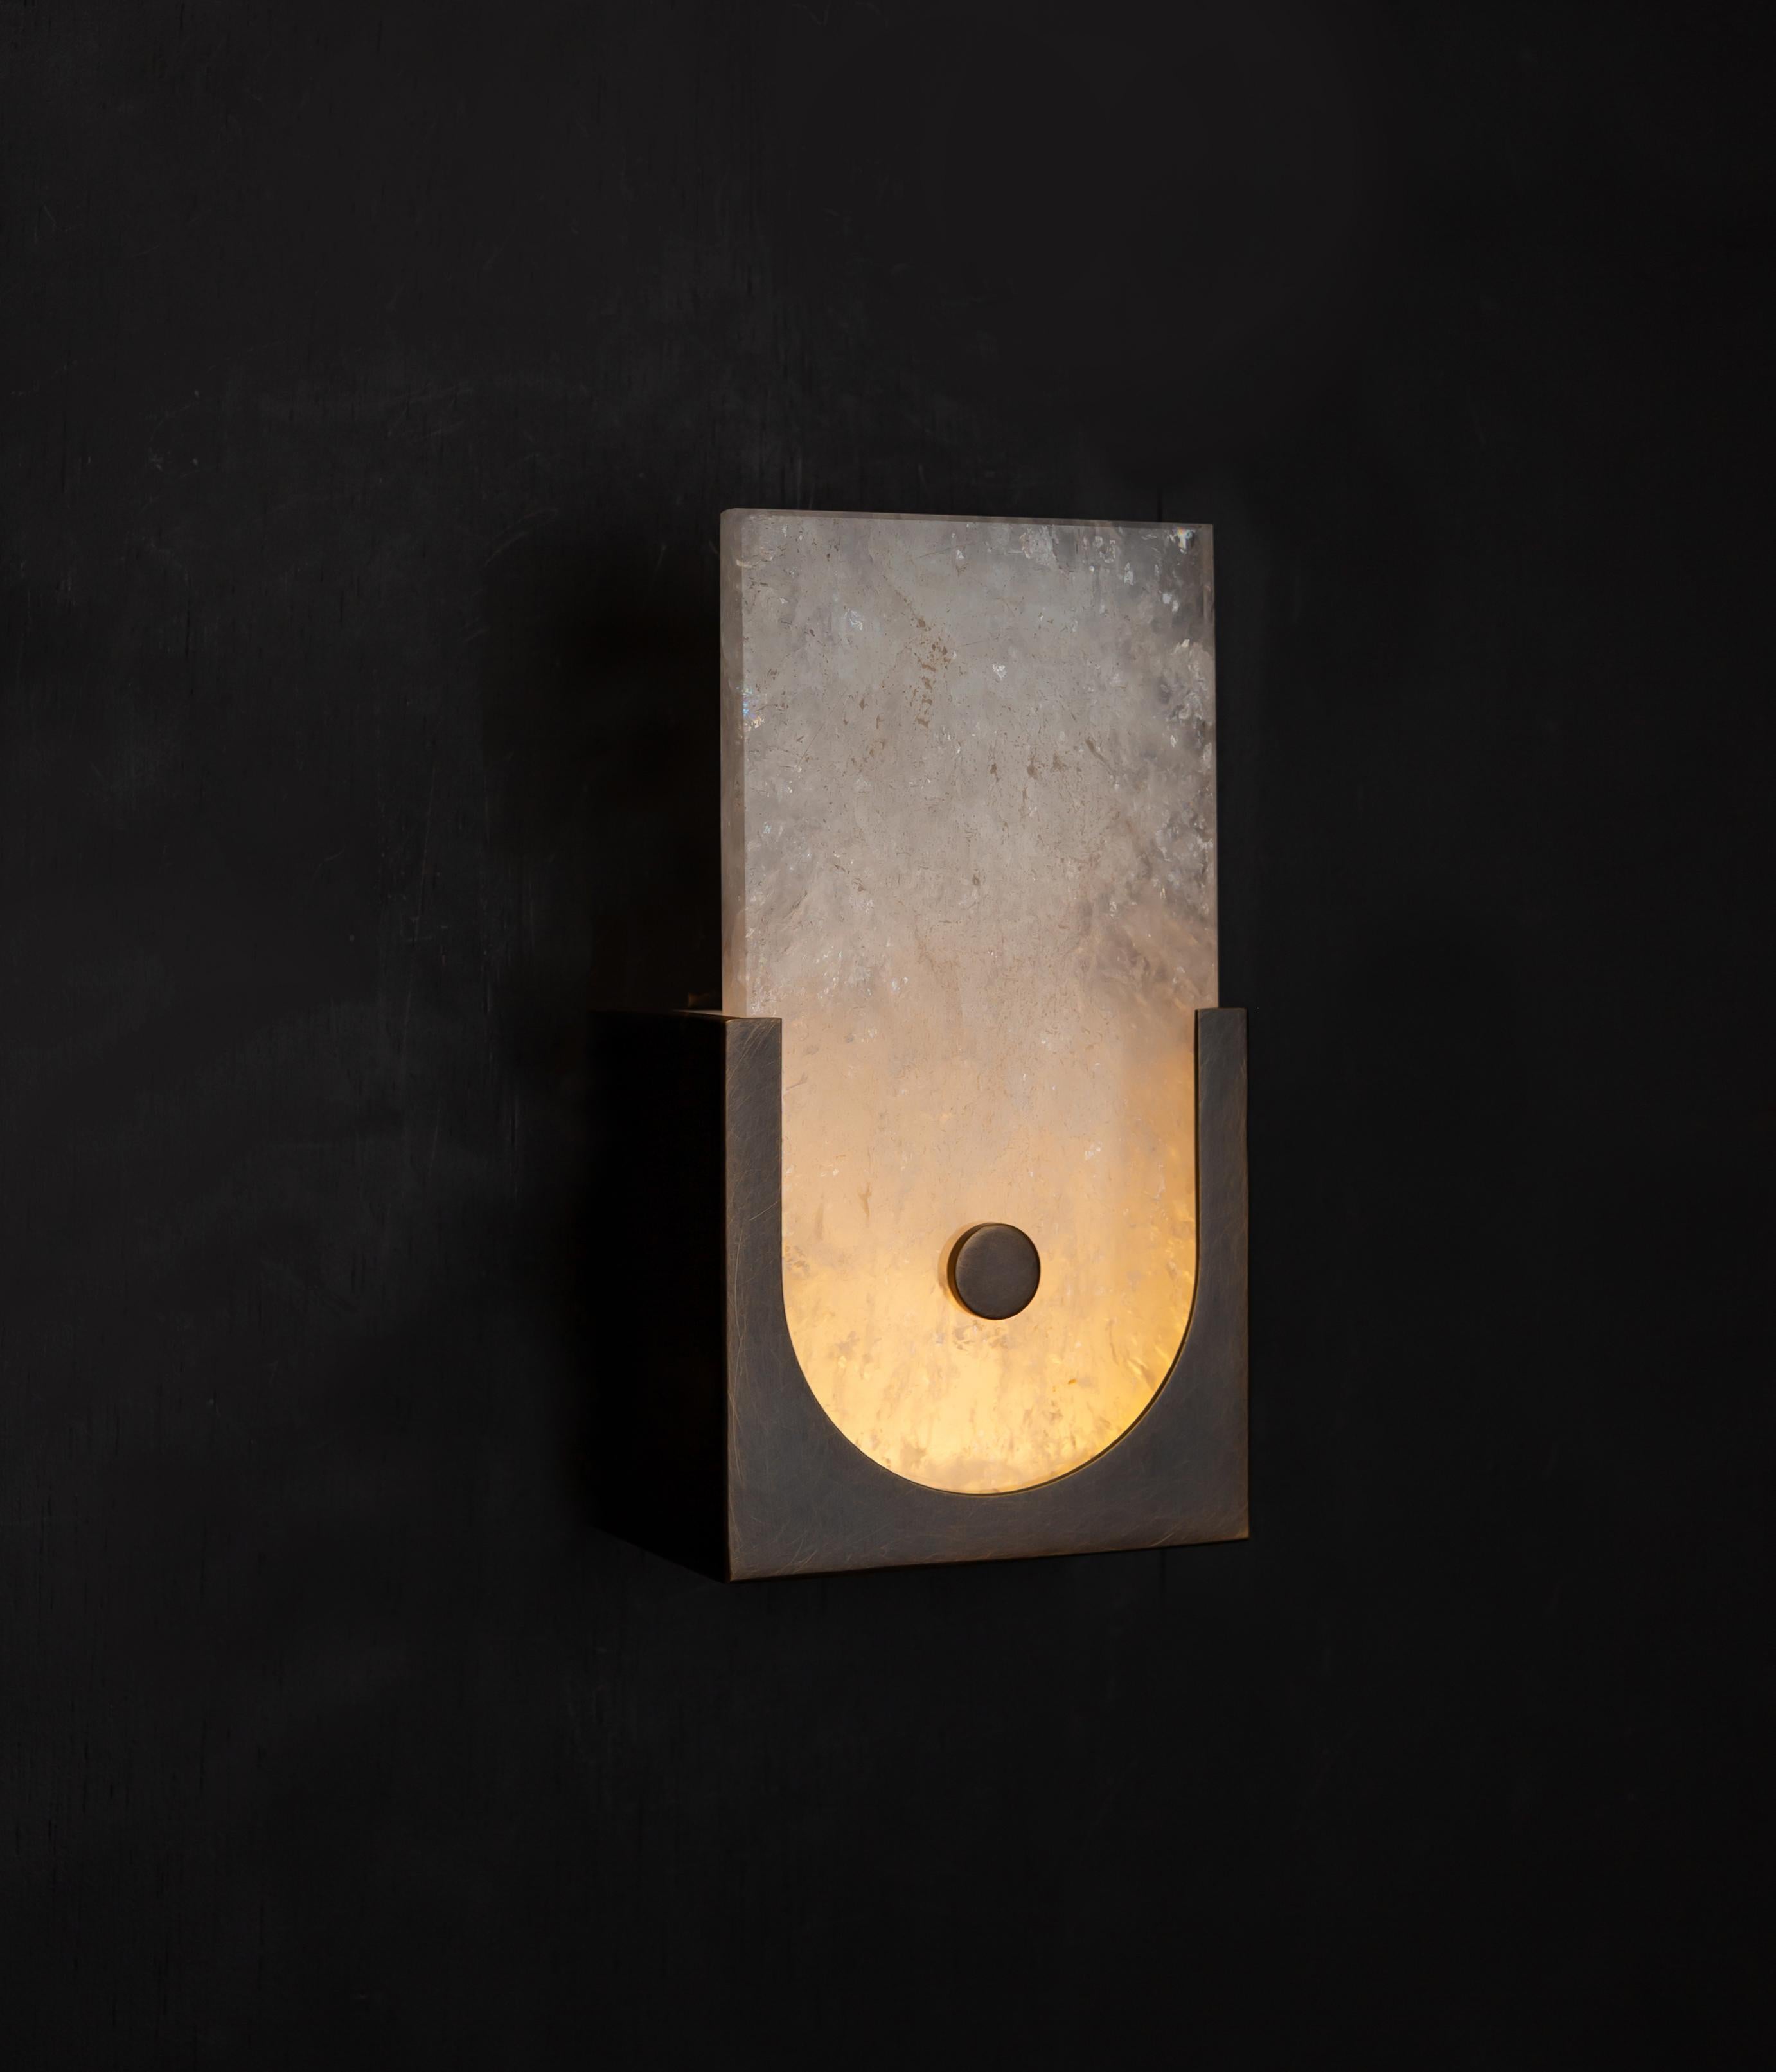 Quartz rock crystal cast in a solid brass frame with oil rubbed bronze finish.

Models in the collection are individually hand-crafted by the skilled artisans in our studio. Custom versions tailored to a specific setting are available by commission.